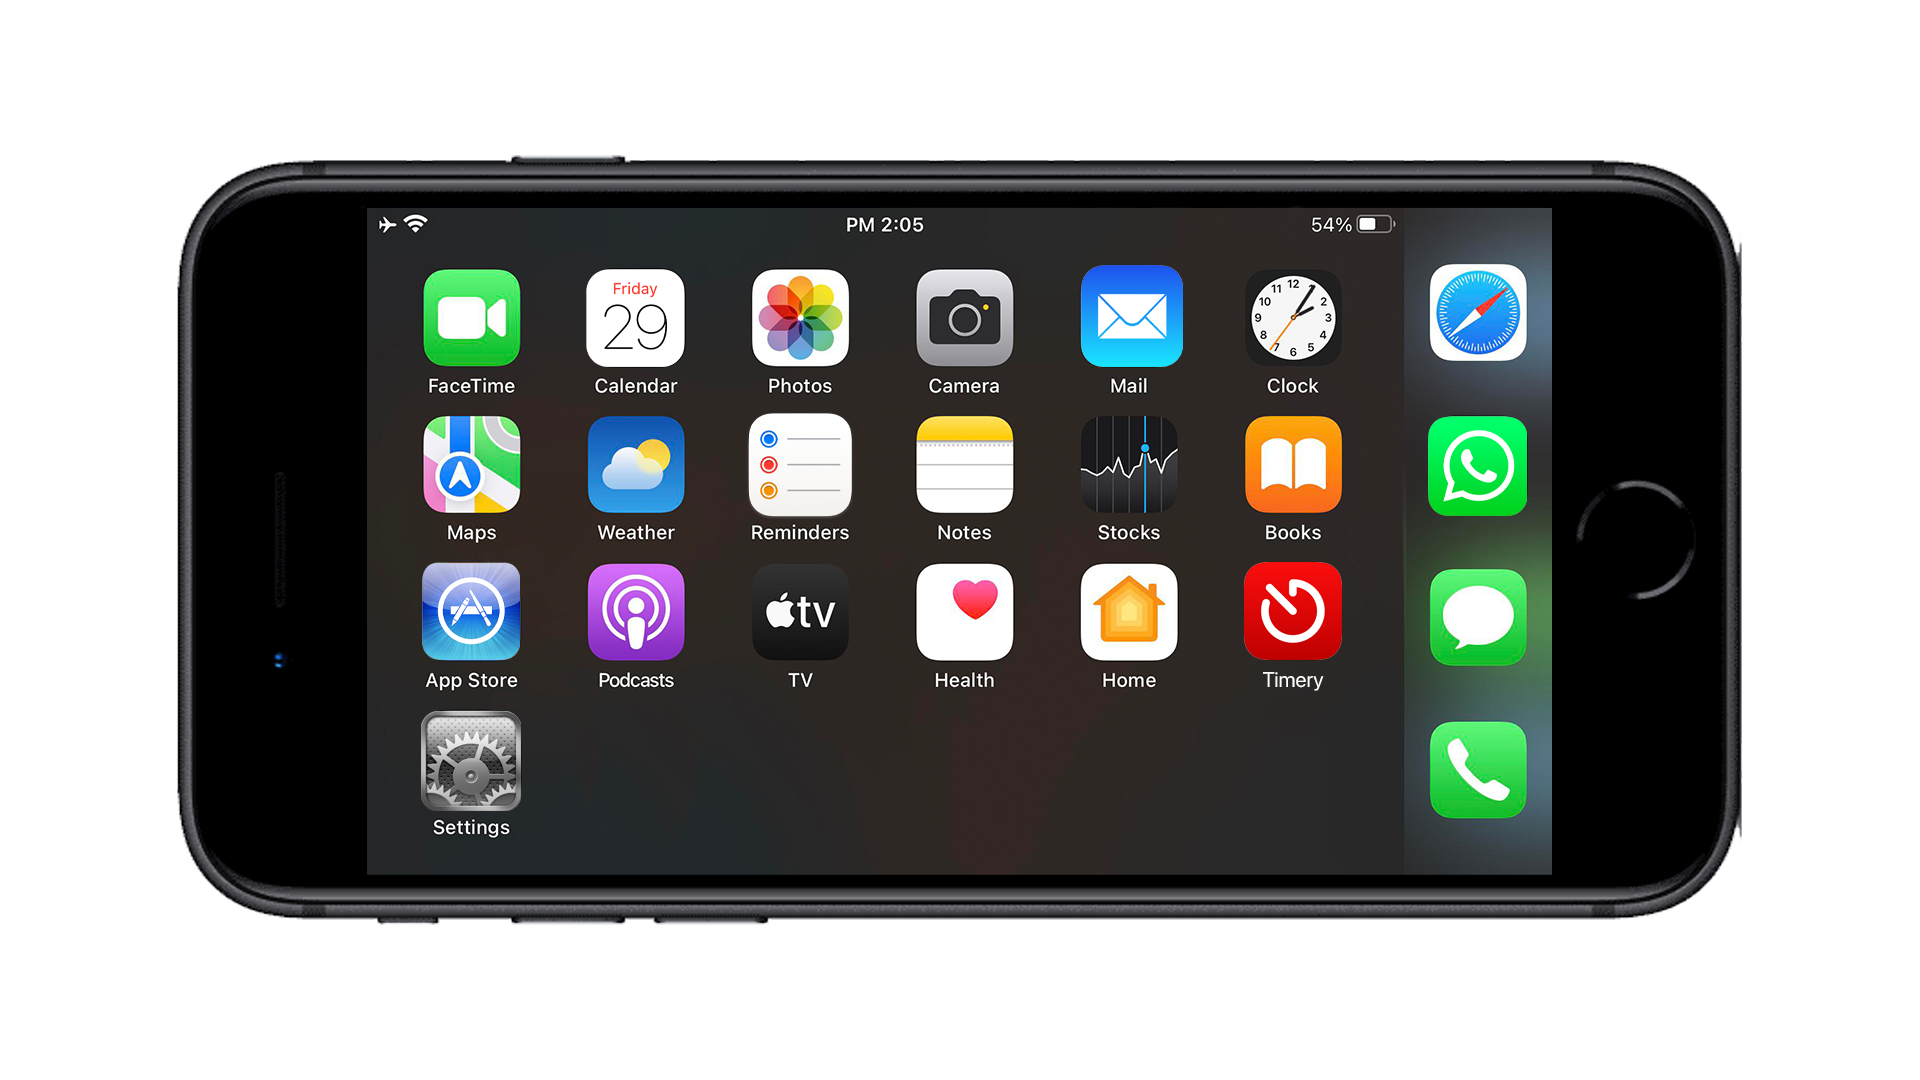 iPhone 8 Plus in landscape mode on the home screen